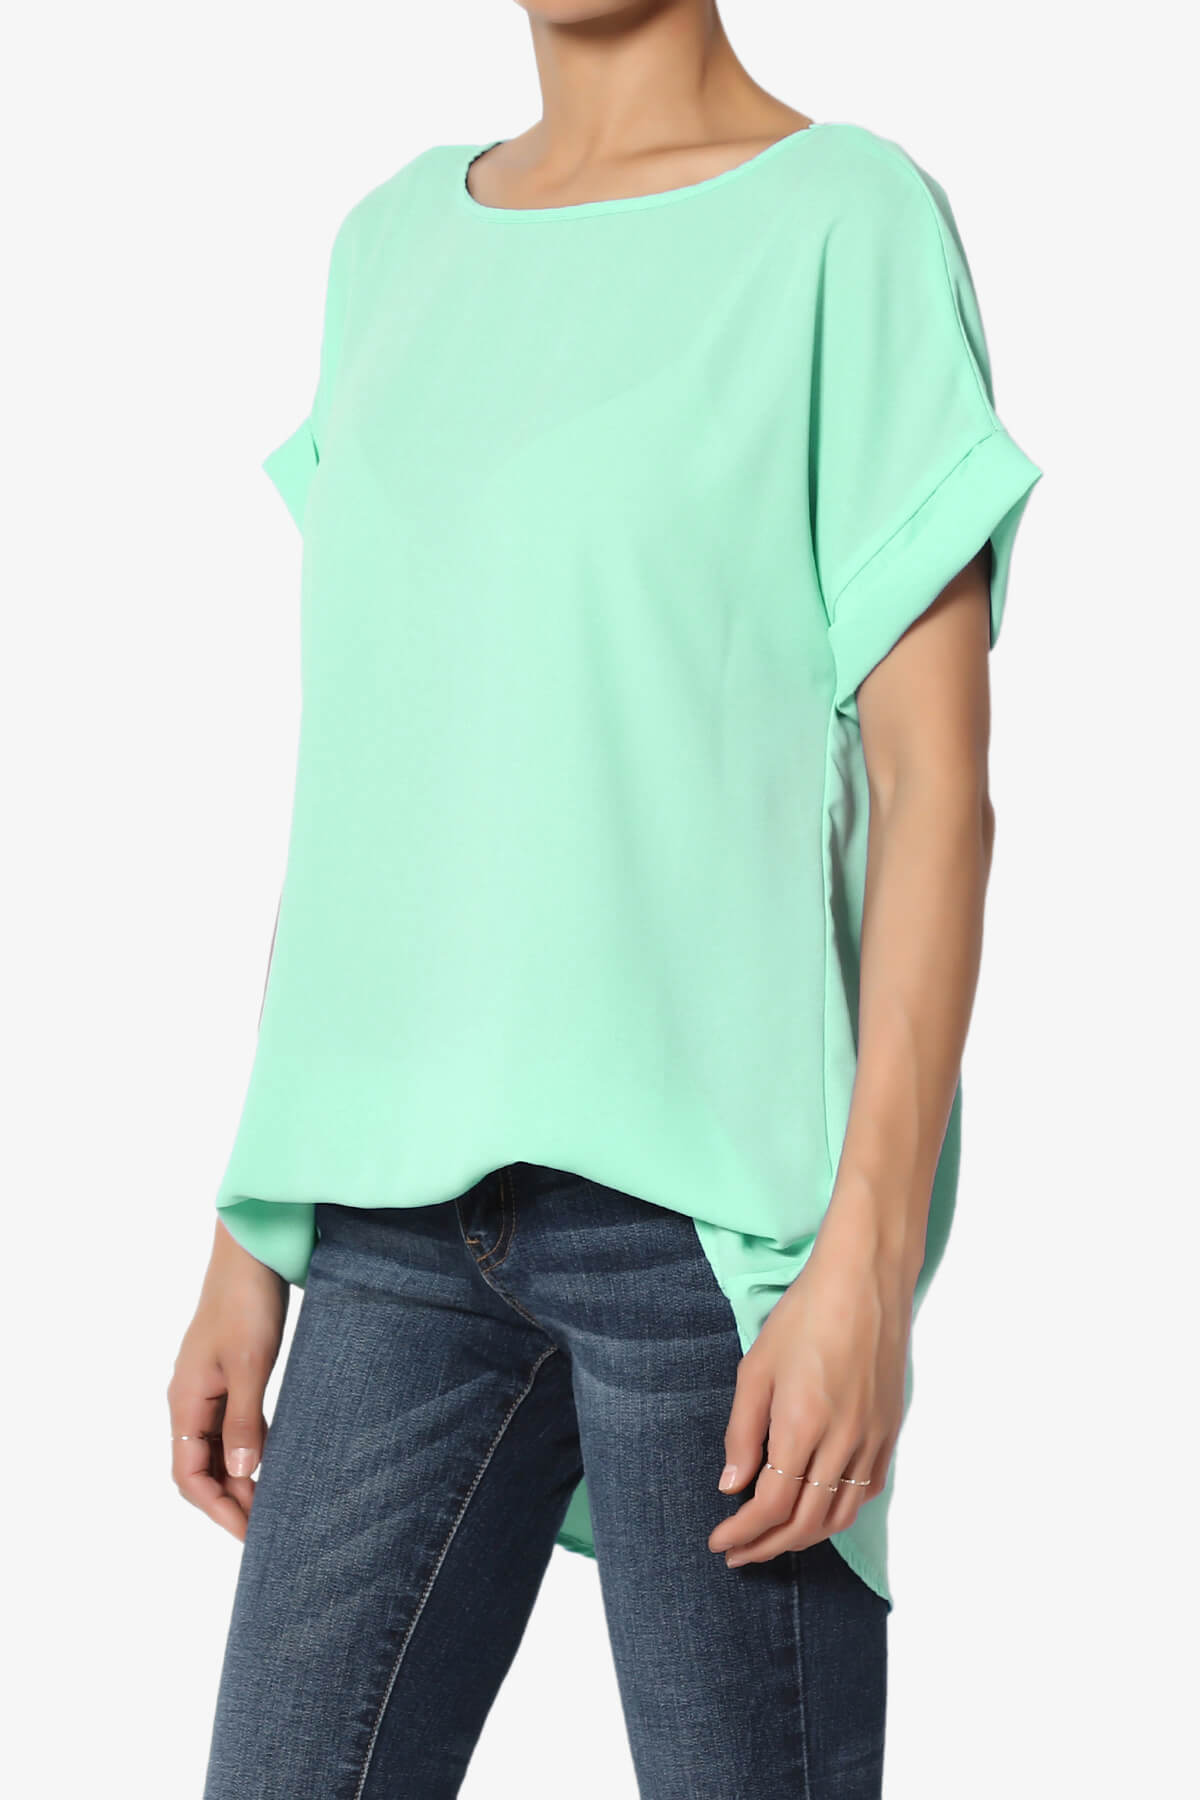 Load image into Gallery viewer, Juliette Boat Neck Chiffon Top MINT_3
